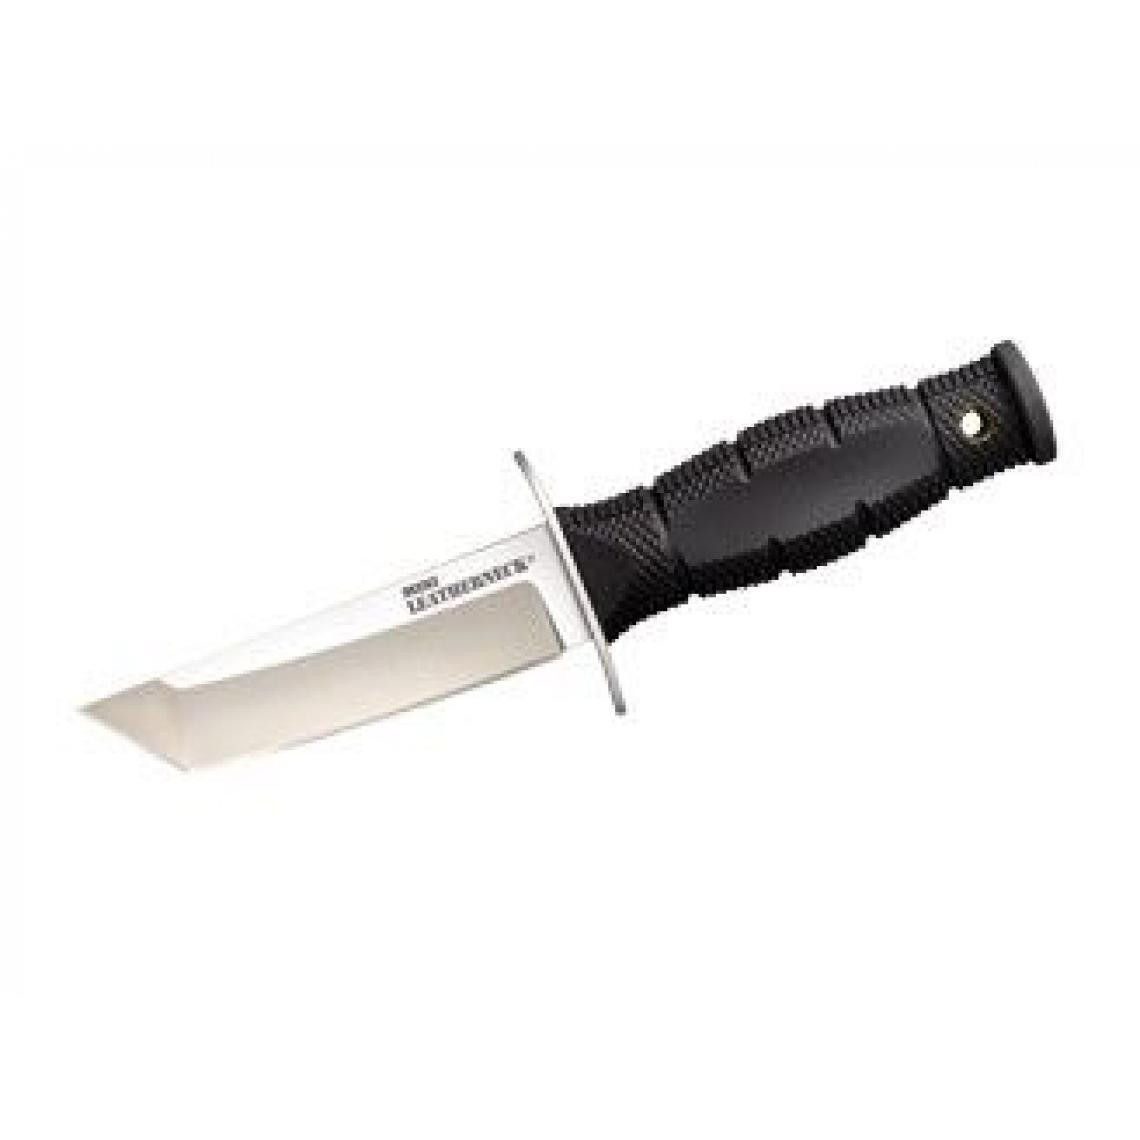 Divers Marques - Cold Steel MINI LEATHERNECK TANTO 39LSAA - Outils de coupe